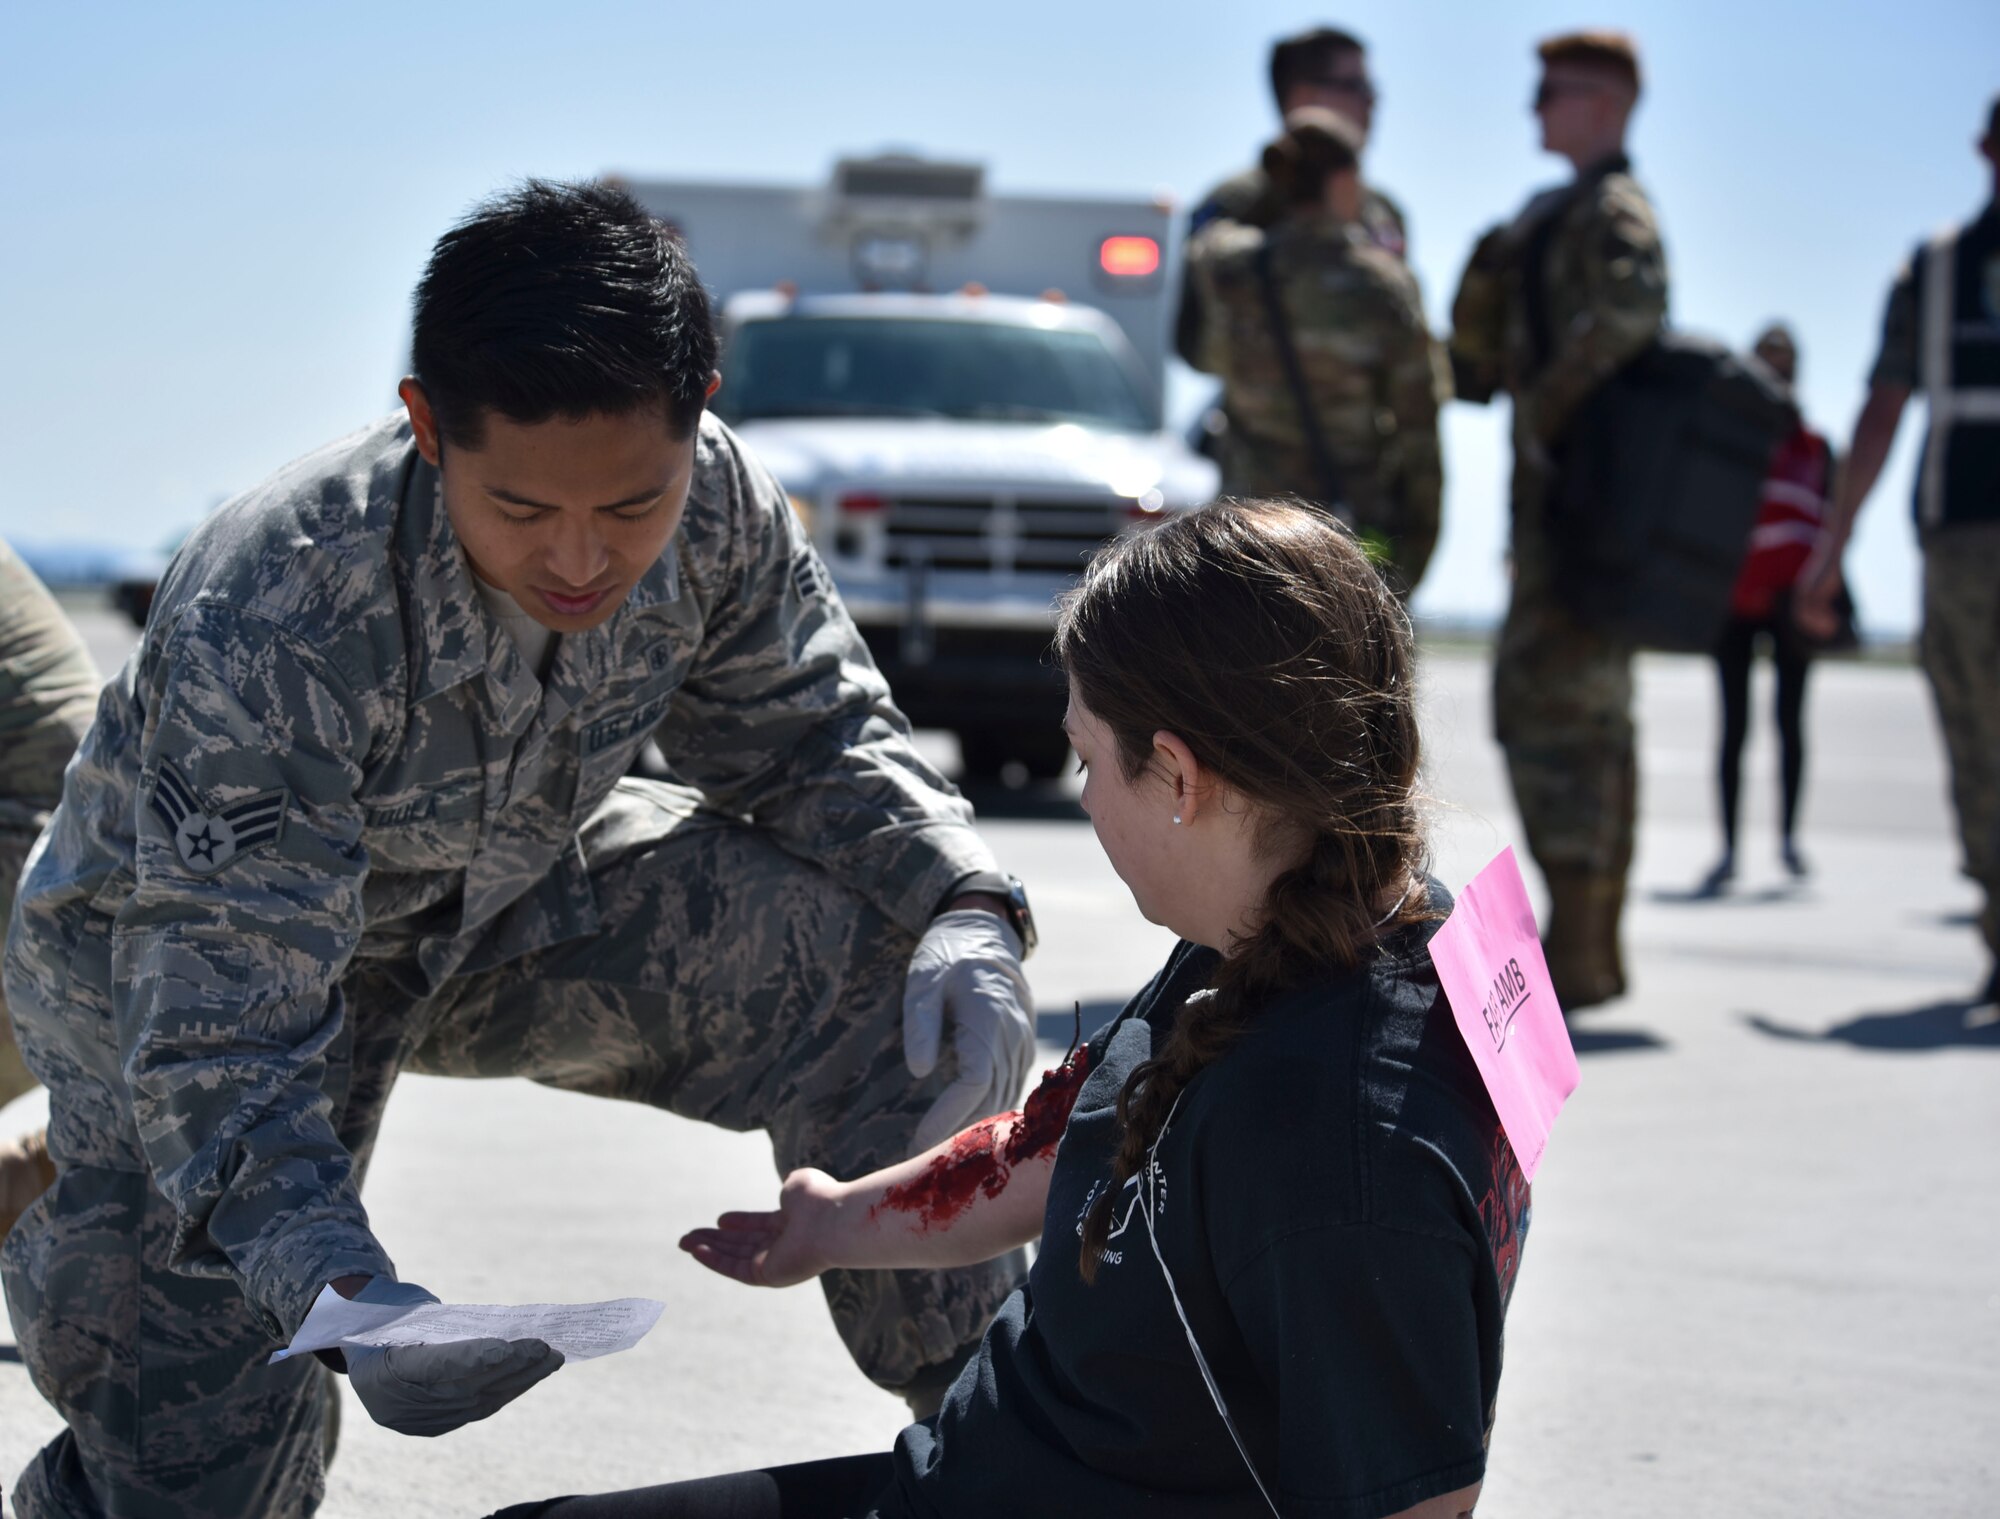 U.S. Air Force Senior Airman Urique Tatoula, 92nd Aerospace Medical Squadron operational medical technician, provides simulated medical care to Airman Kristine Bonch, 92nd Force Support Squadron fitness apprentice, during a Major Accident Response Exercise at Fairchild Air Force Base, Washington, May 9, 2019.